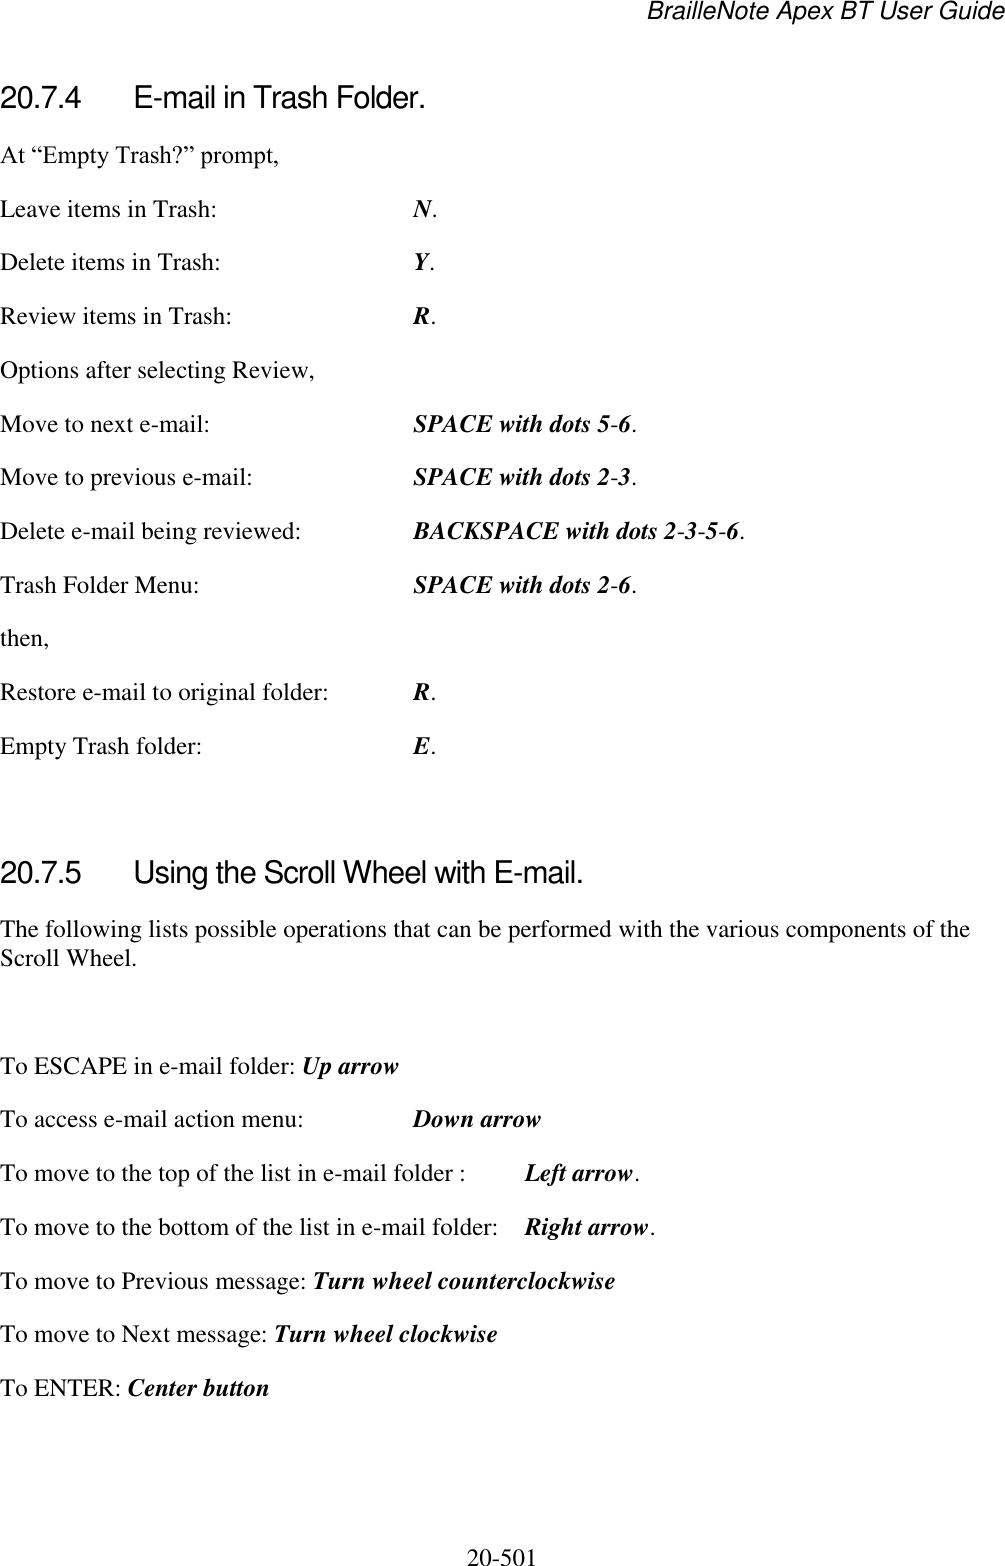 BrailleNote Apex BT User Guide   20-501   20.7.4  E-mail in Trash Folder. At “Empty Trash?” prompt, Leave items in Trash:  N. Delete items in Trash:  Y. Review items in Trash:  R. Options after selecting Review, Move to next e-mail:  SPACE with dots 5-6. Move to previous e-mail:  SPACE with dots 2-3. Delete e-mail being reviewed:  BACKSPACE with dots 2-3-5-6. Trash Folder Menu:  SPACE with dots 2-6. then, Restore e-mail to original folder:  R. Empty Trash folder:  E.   20.7.5  Using the Scroll Wheel with E-mail. The following lists possible operations that can be performed with the various components of the Scroll Wheel.   To ESCAPE in e-mail folder: Up arrow To access e-mail action menu:  Down arrow To move to the top of the list in e-mail folder :  Left arrow. To move to the bottom of the list in e-mail folder:  Right arrow. To move to Previous message: Turn wheel counterclockwise To move to Next message: Turn wheel clockwise To ENTER: Center button   